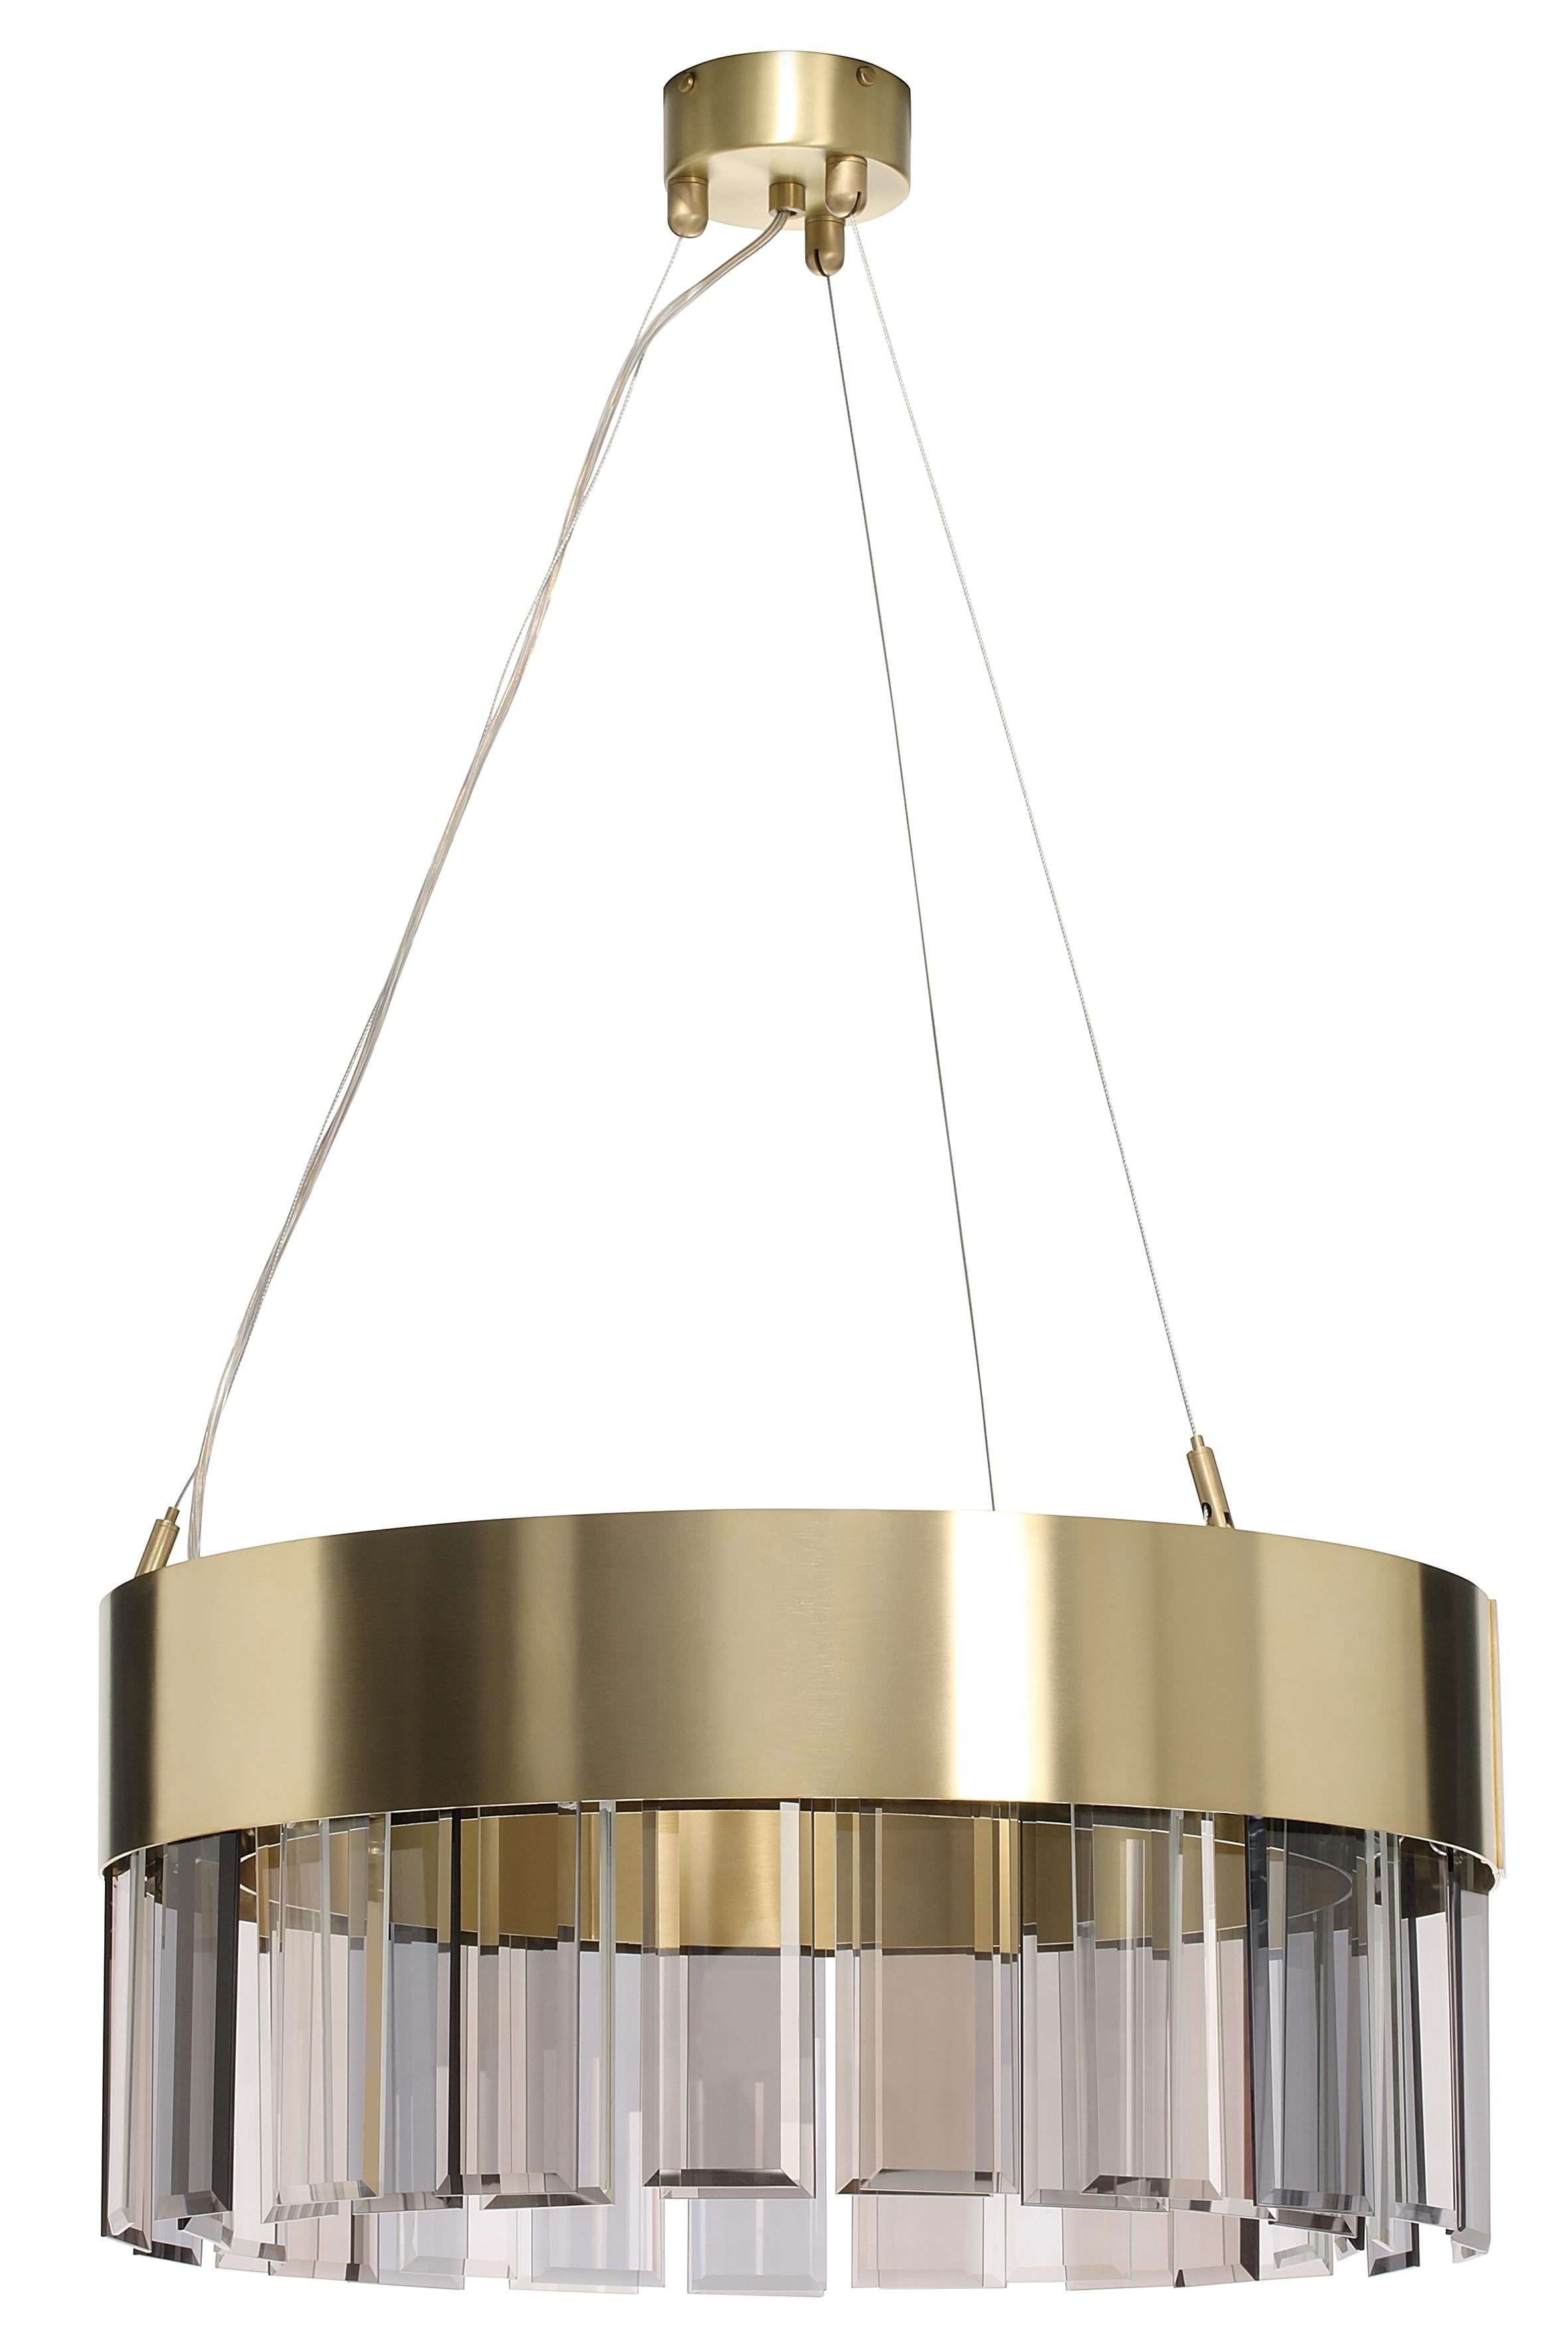 Solaris 500 pendant by CTO Lighting
Materials: satin brass with cut glass drops and stainless steel suspension wire/clear flex
Dimensions: H 25 x W 50 cm 

All our lamps can be wired according to each country. If sold to the USA it will be wired